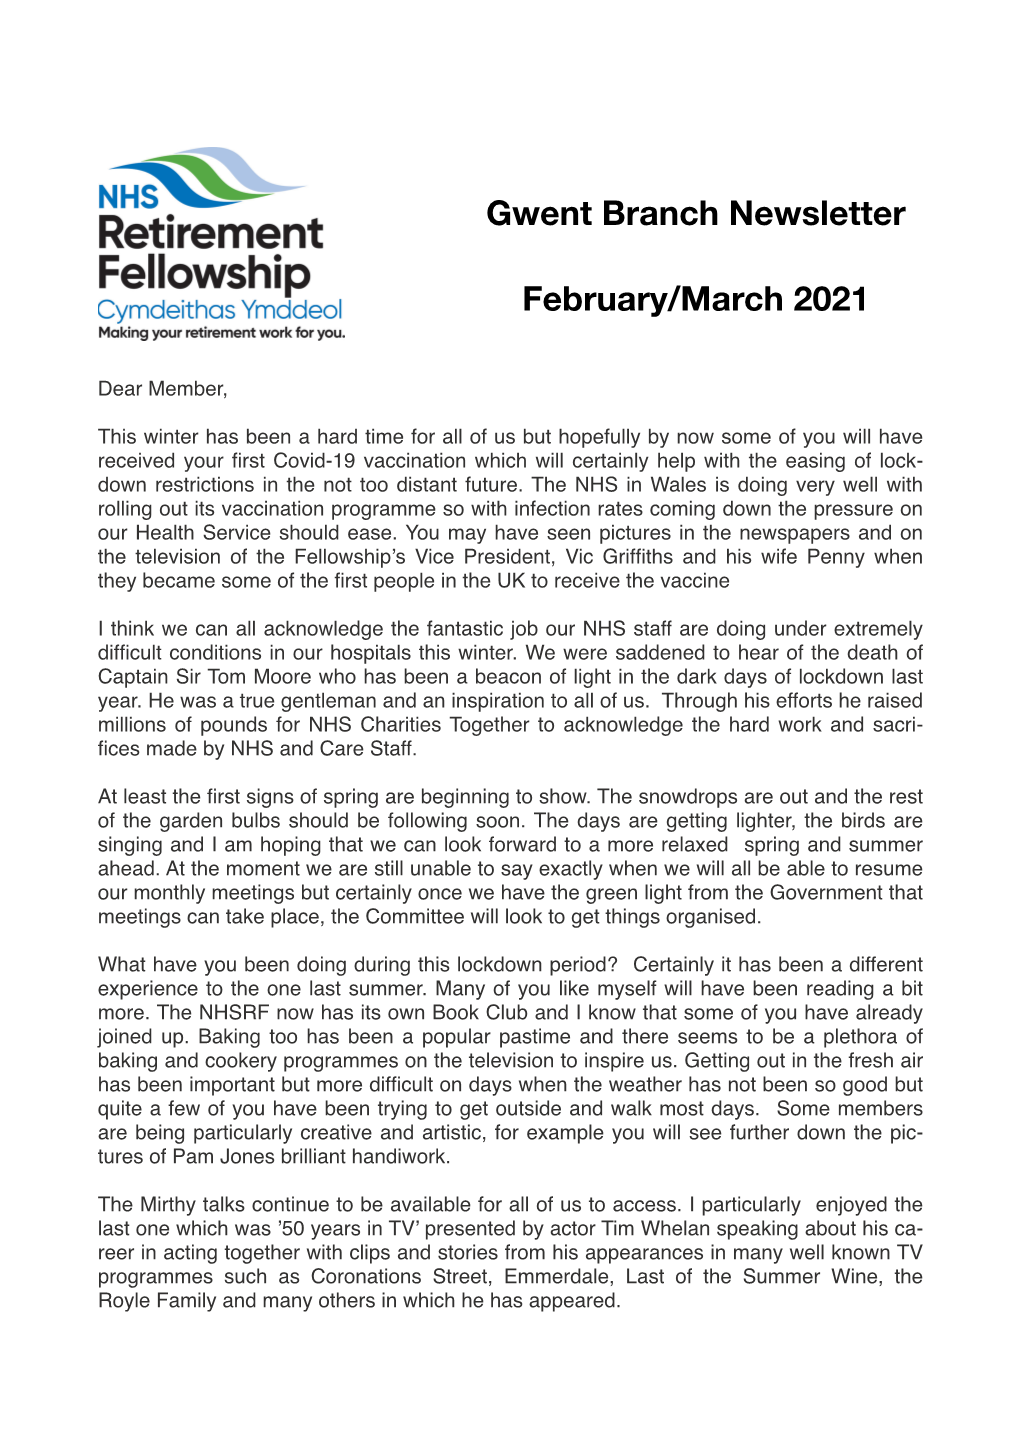 Gwent Branch Newsletter February/March 2021